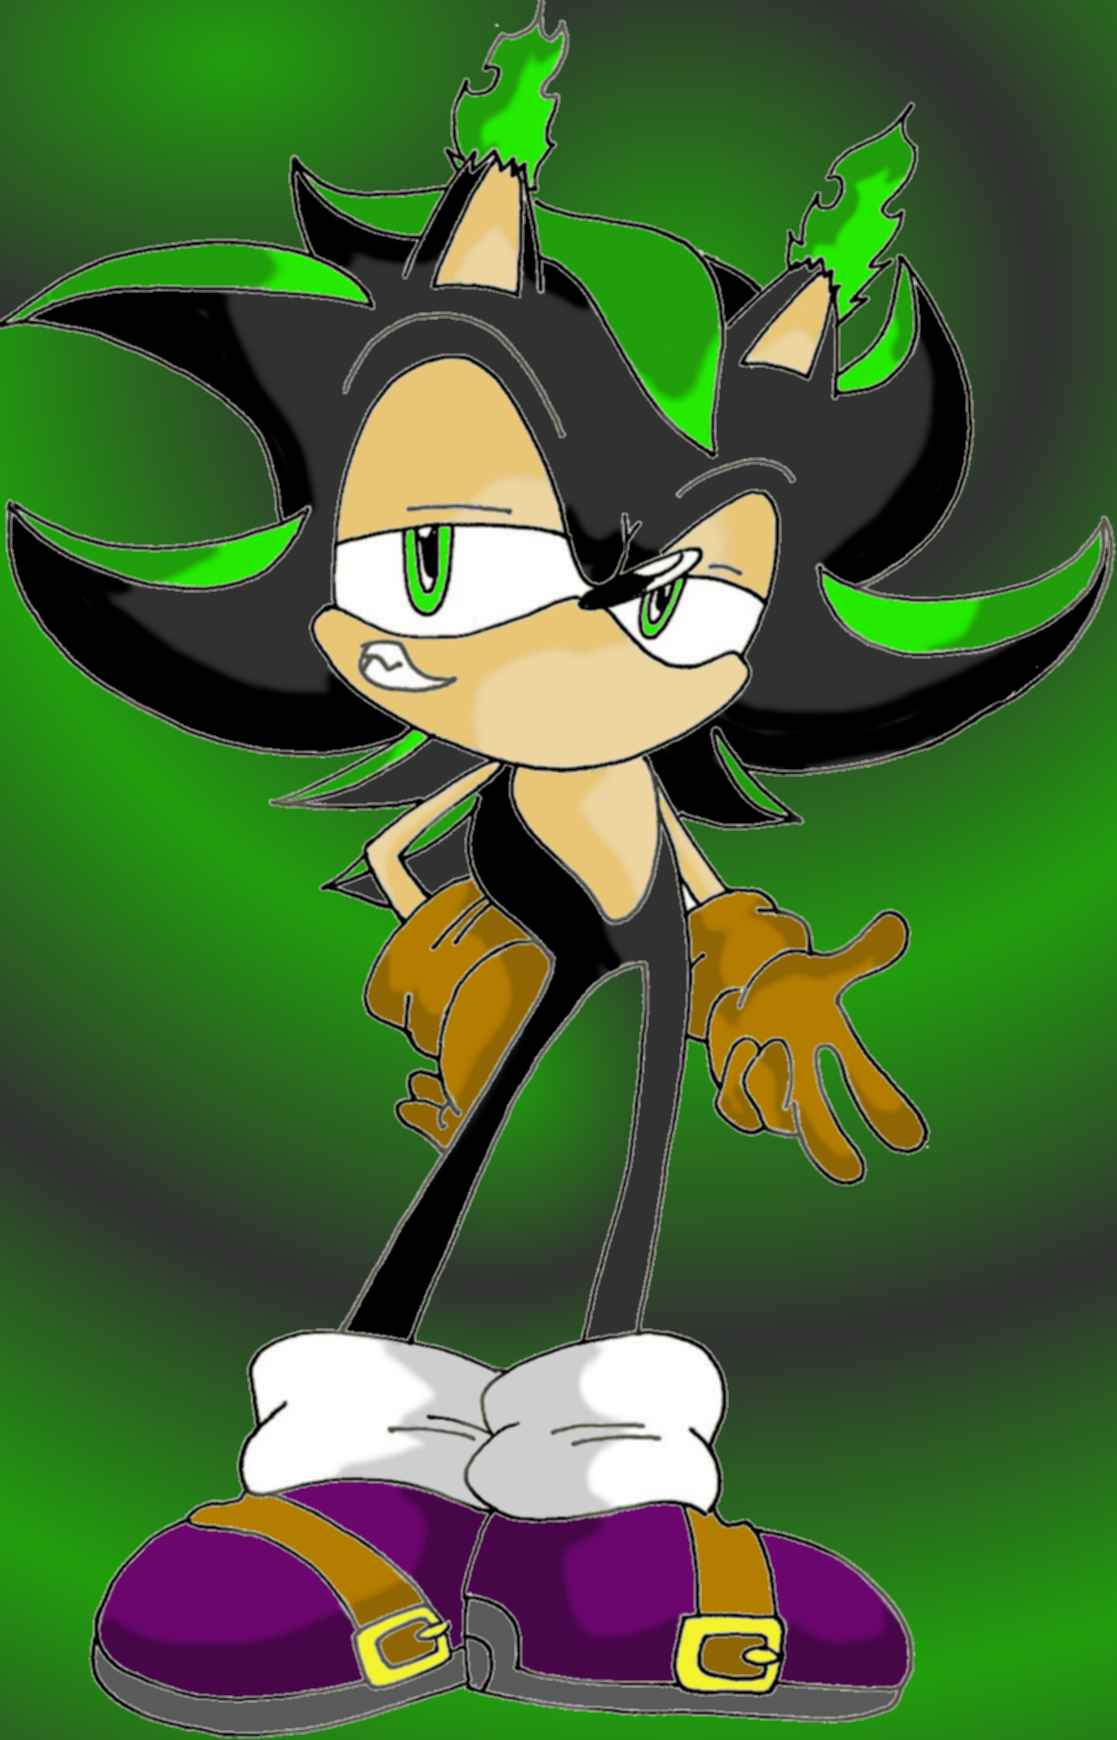 Greg the Hedgehog age 20 by jkgoomba89